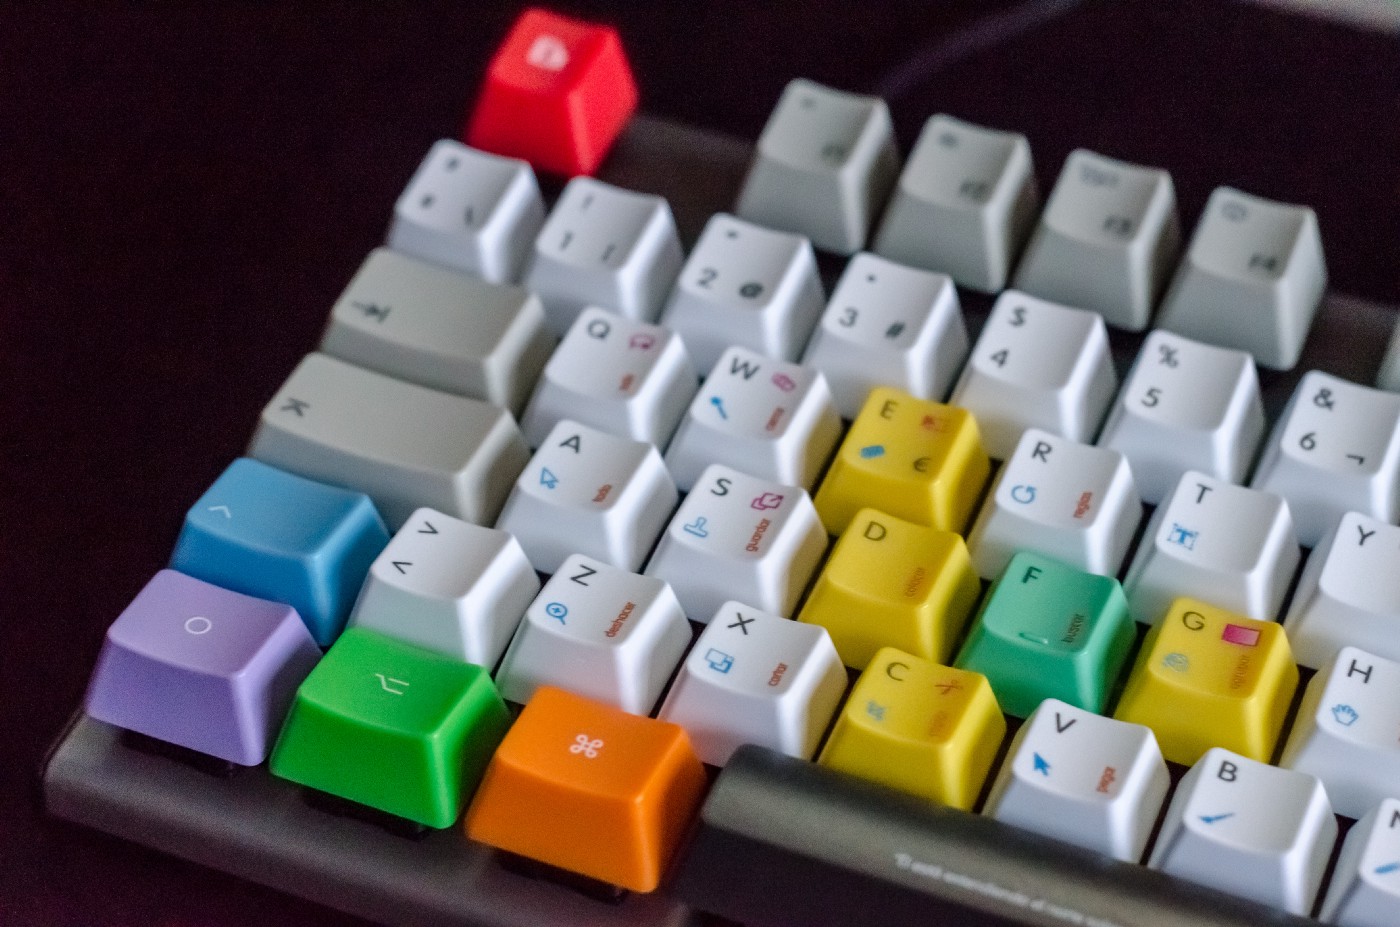 How to use the Ctrl+R keyboard shortcut